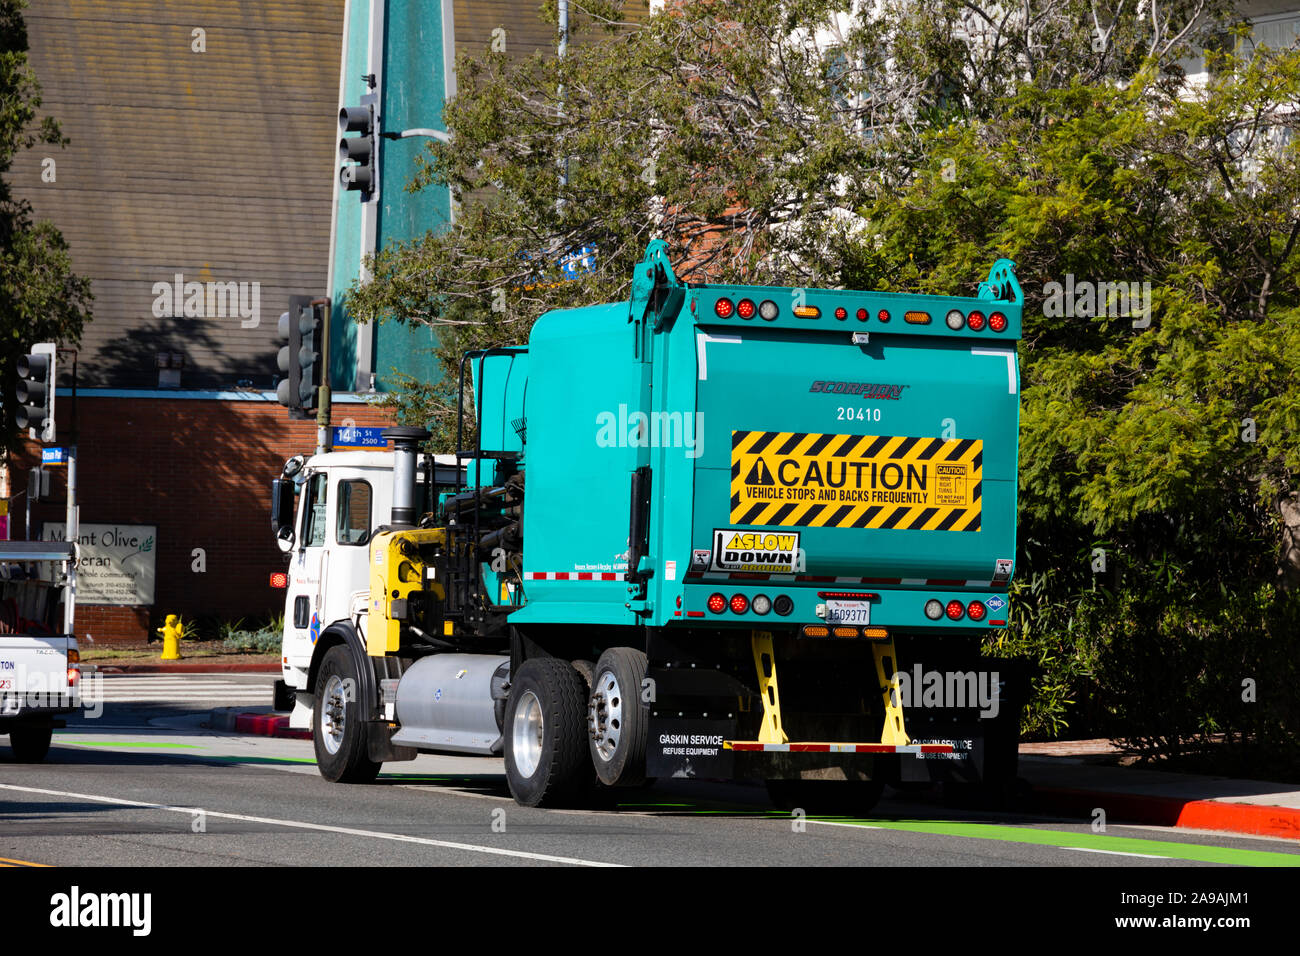 Automated garbage collection vehicle at work, Ocean Park Boulevard, Santa Monica, California, United States of America. USA Stock Photo